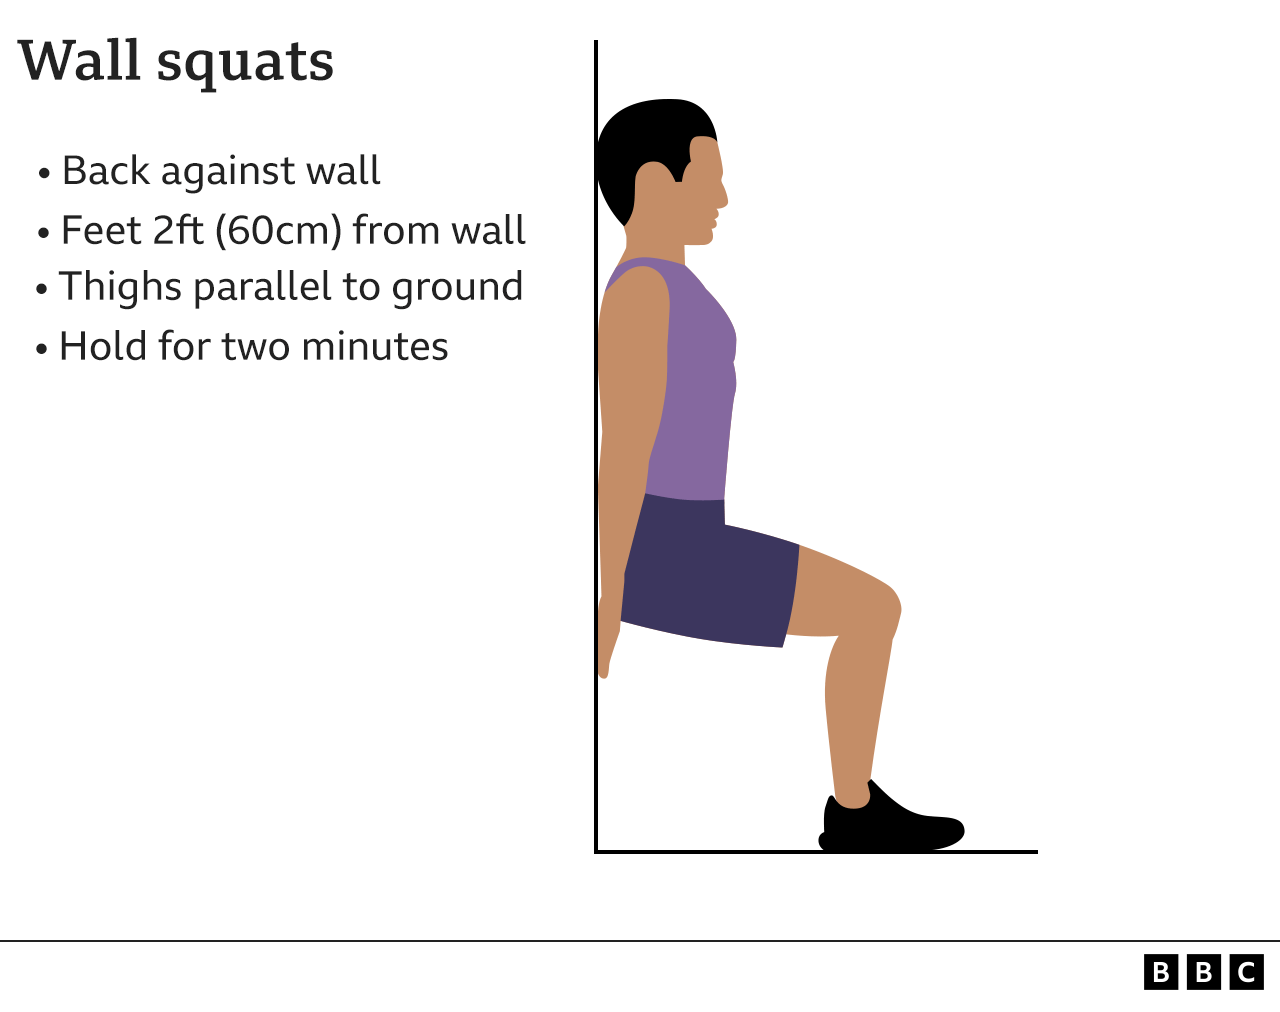 Graphic showing correct position for wall squats